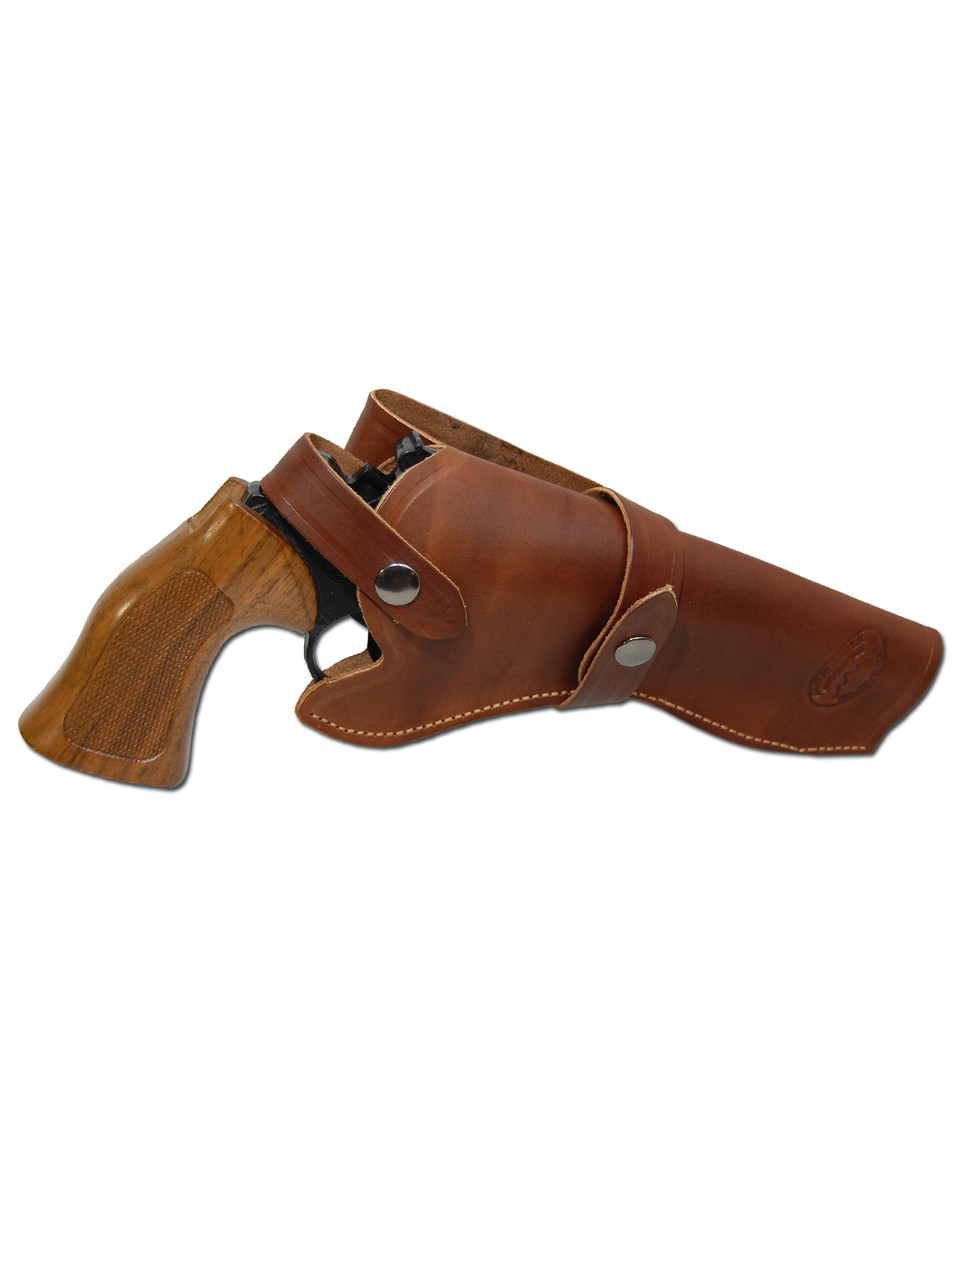 leather holster